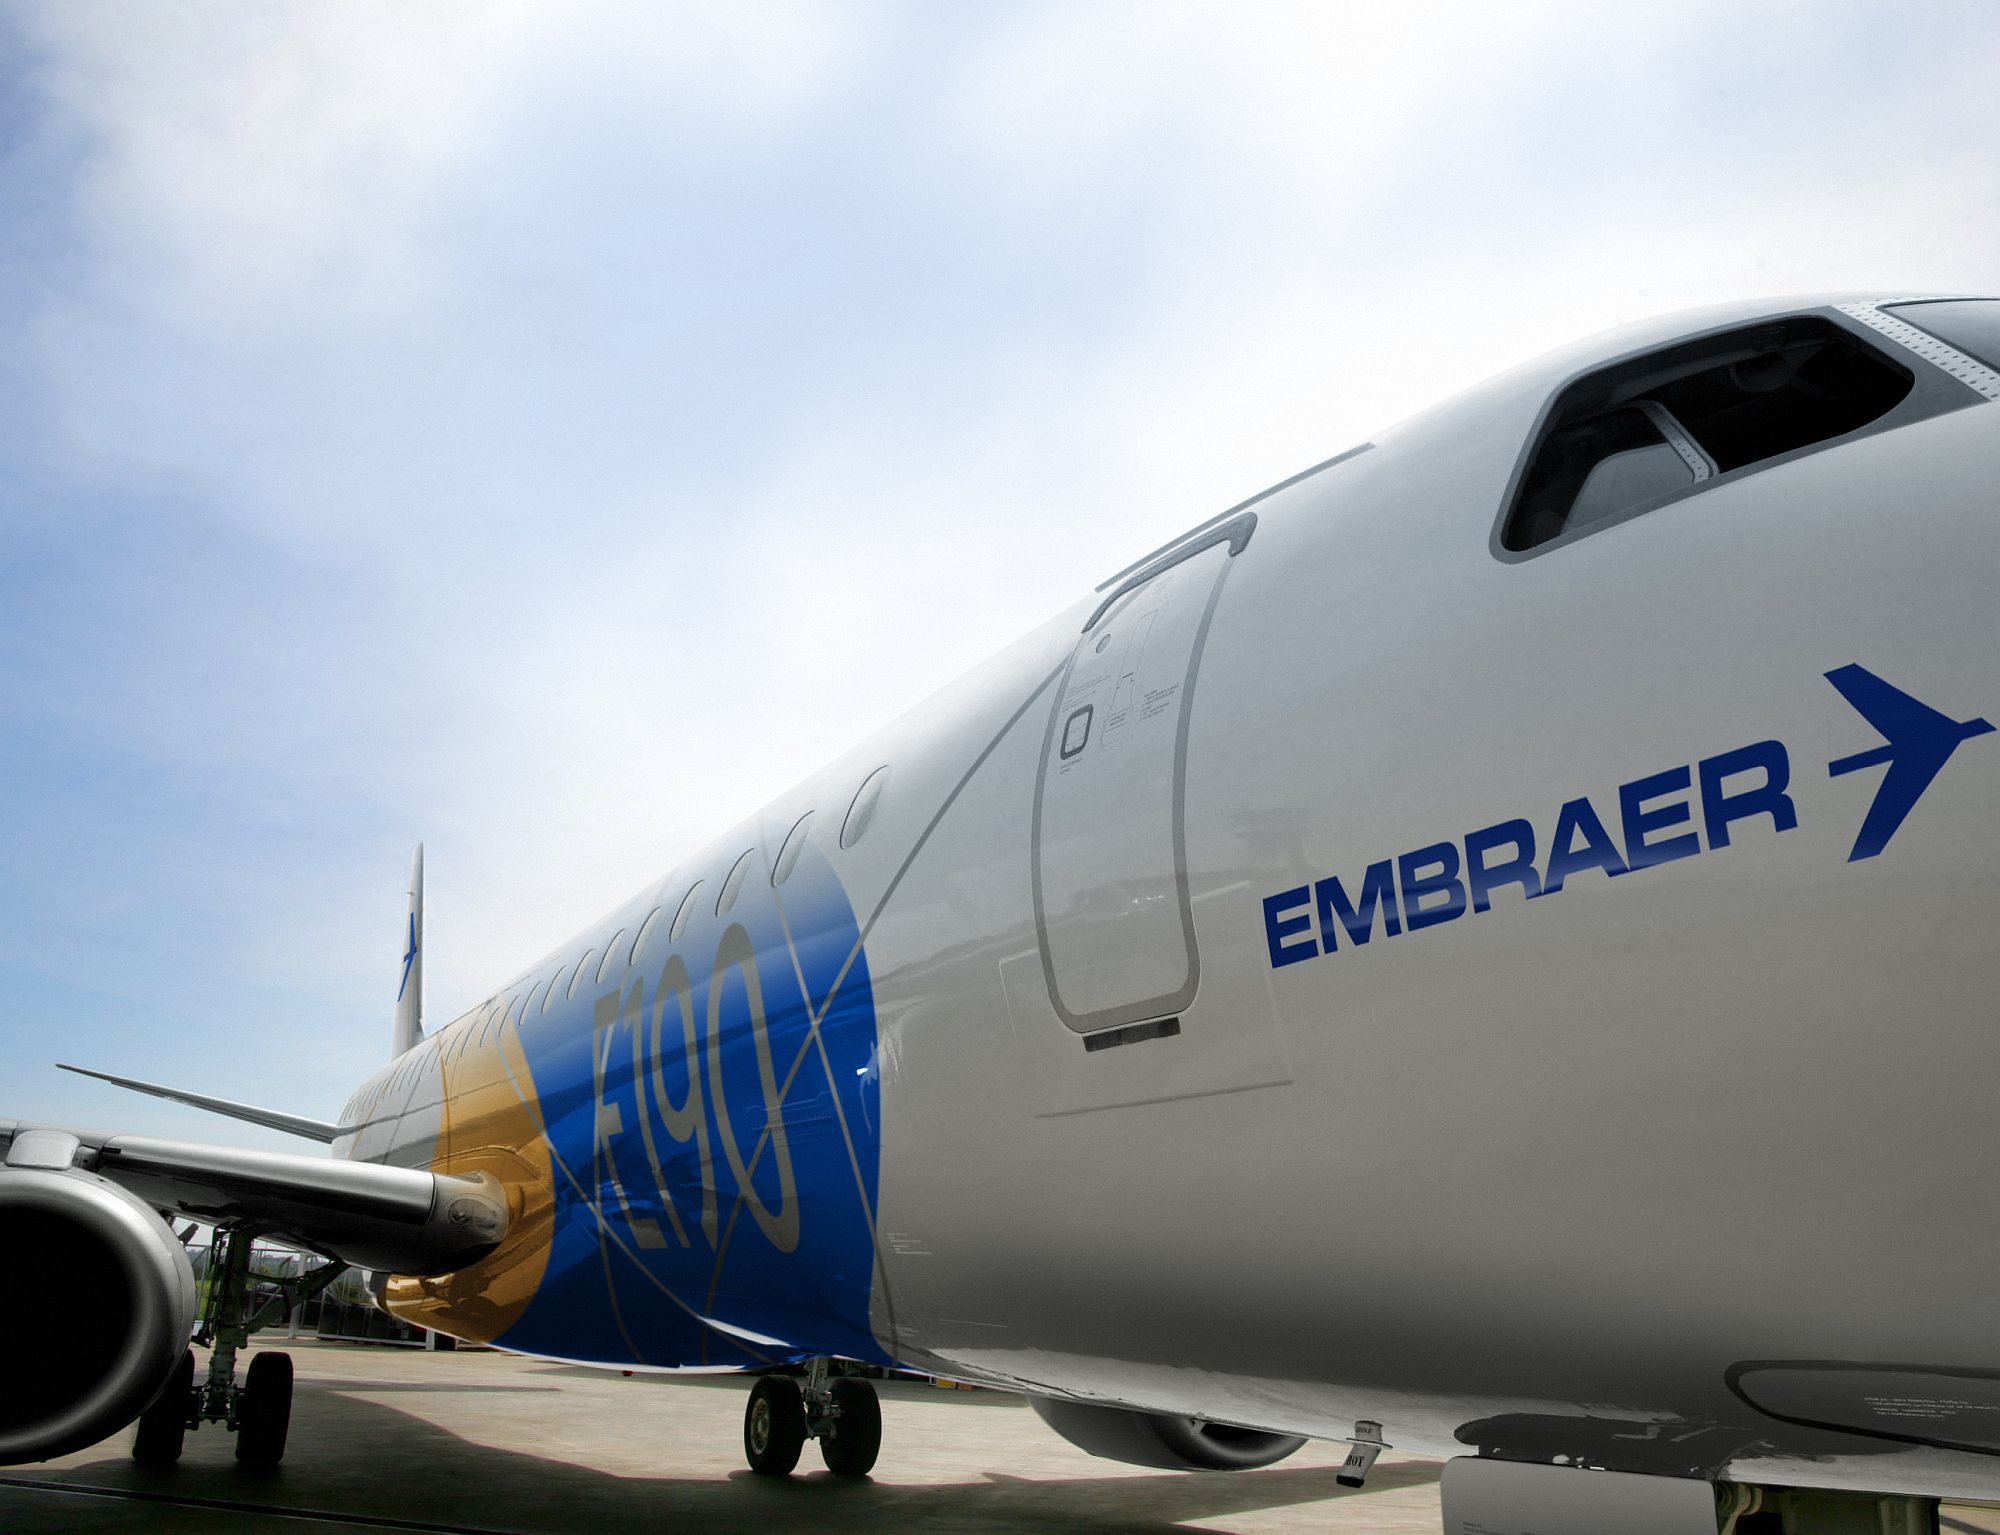 An Embraer airliner. Photo by Embraer